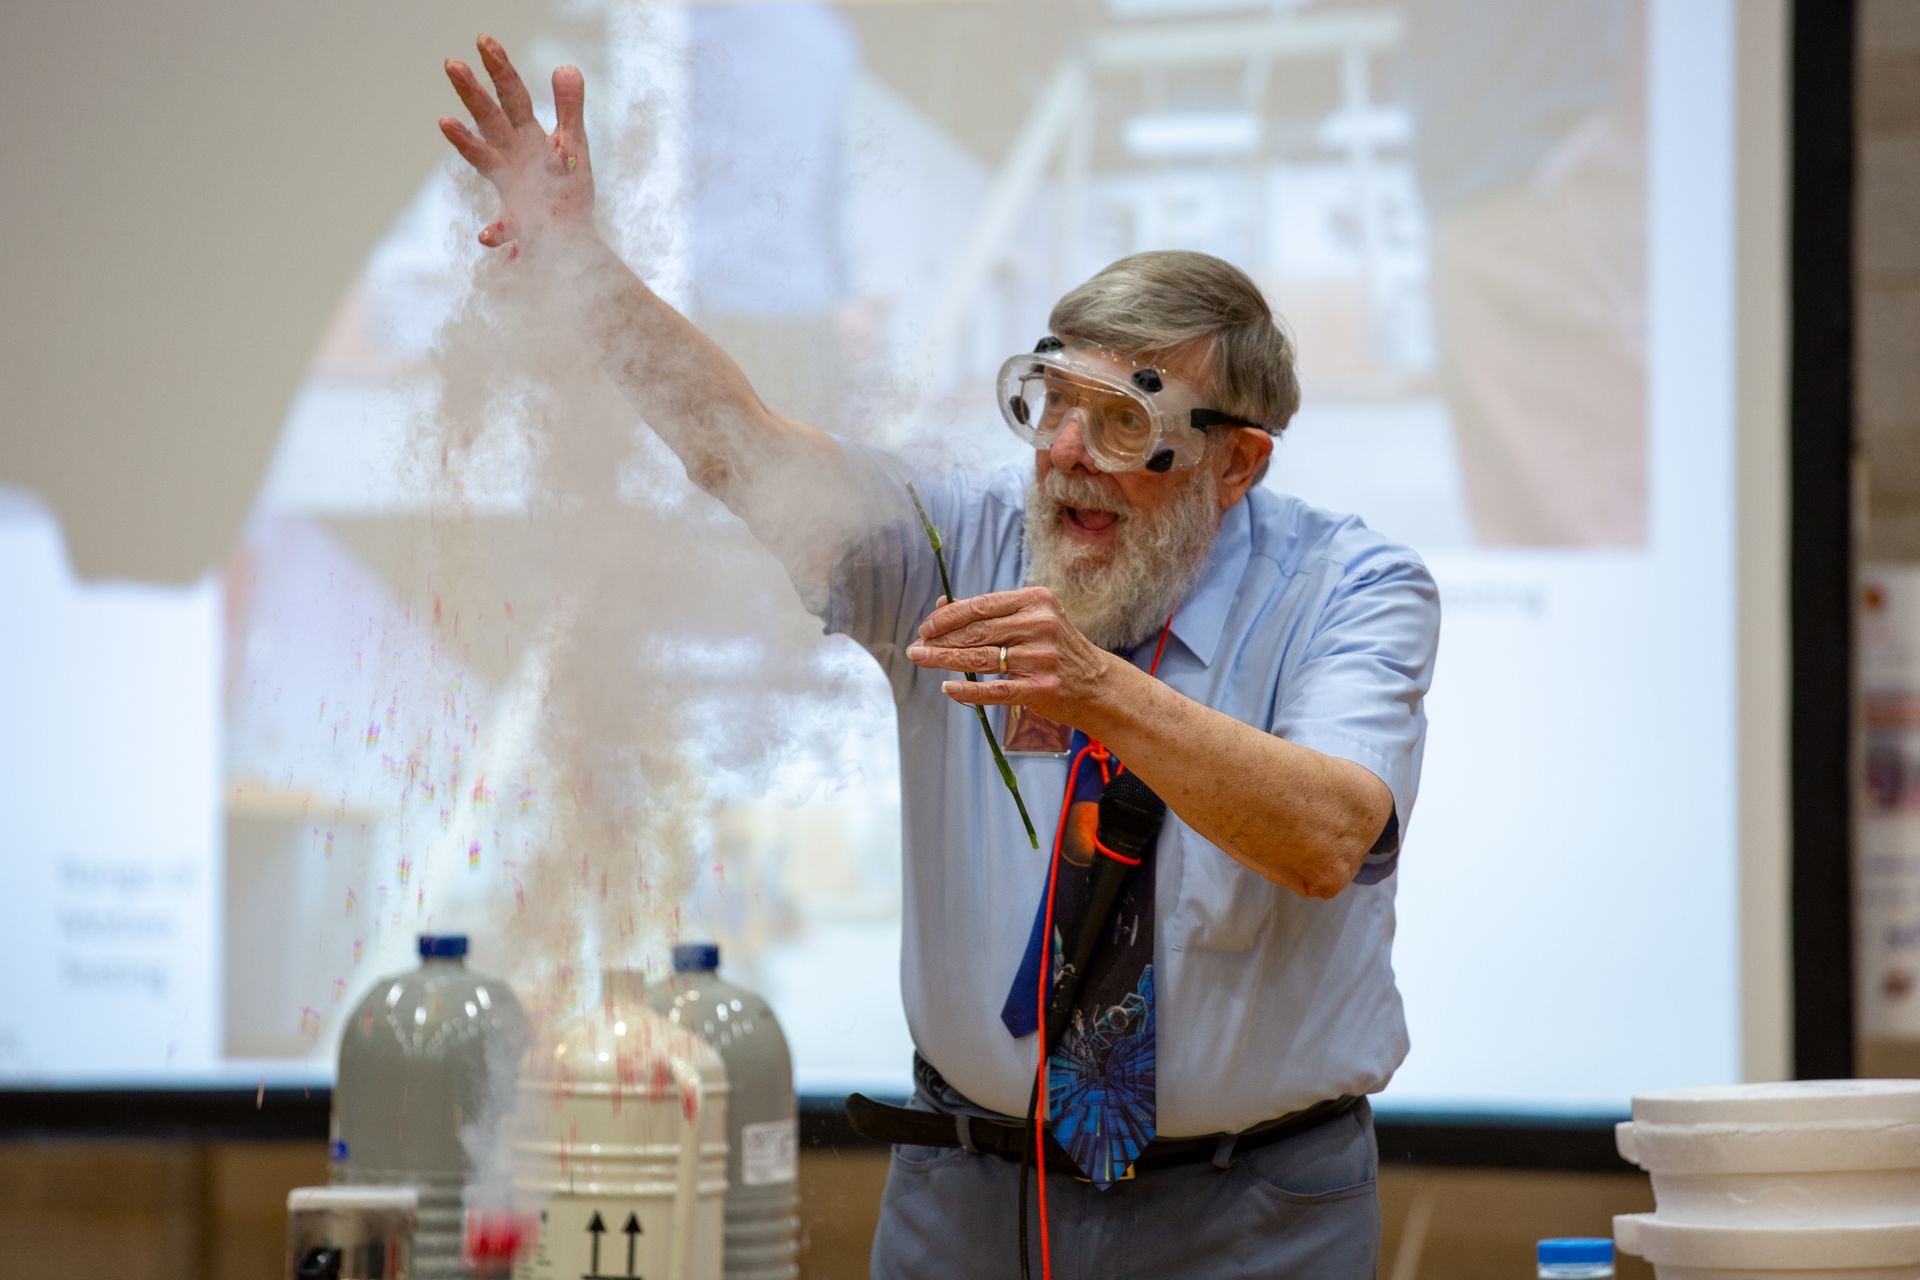 William Phillips (Nobel Laureate '97) uses liquid nitrogen to introduce the freezing cold world of quantum science to 600 middle school students at a partner event